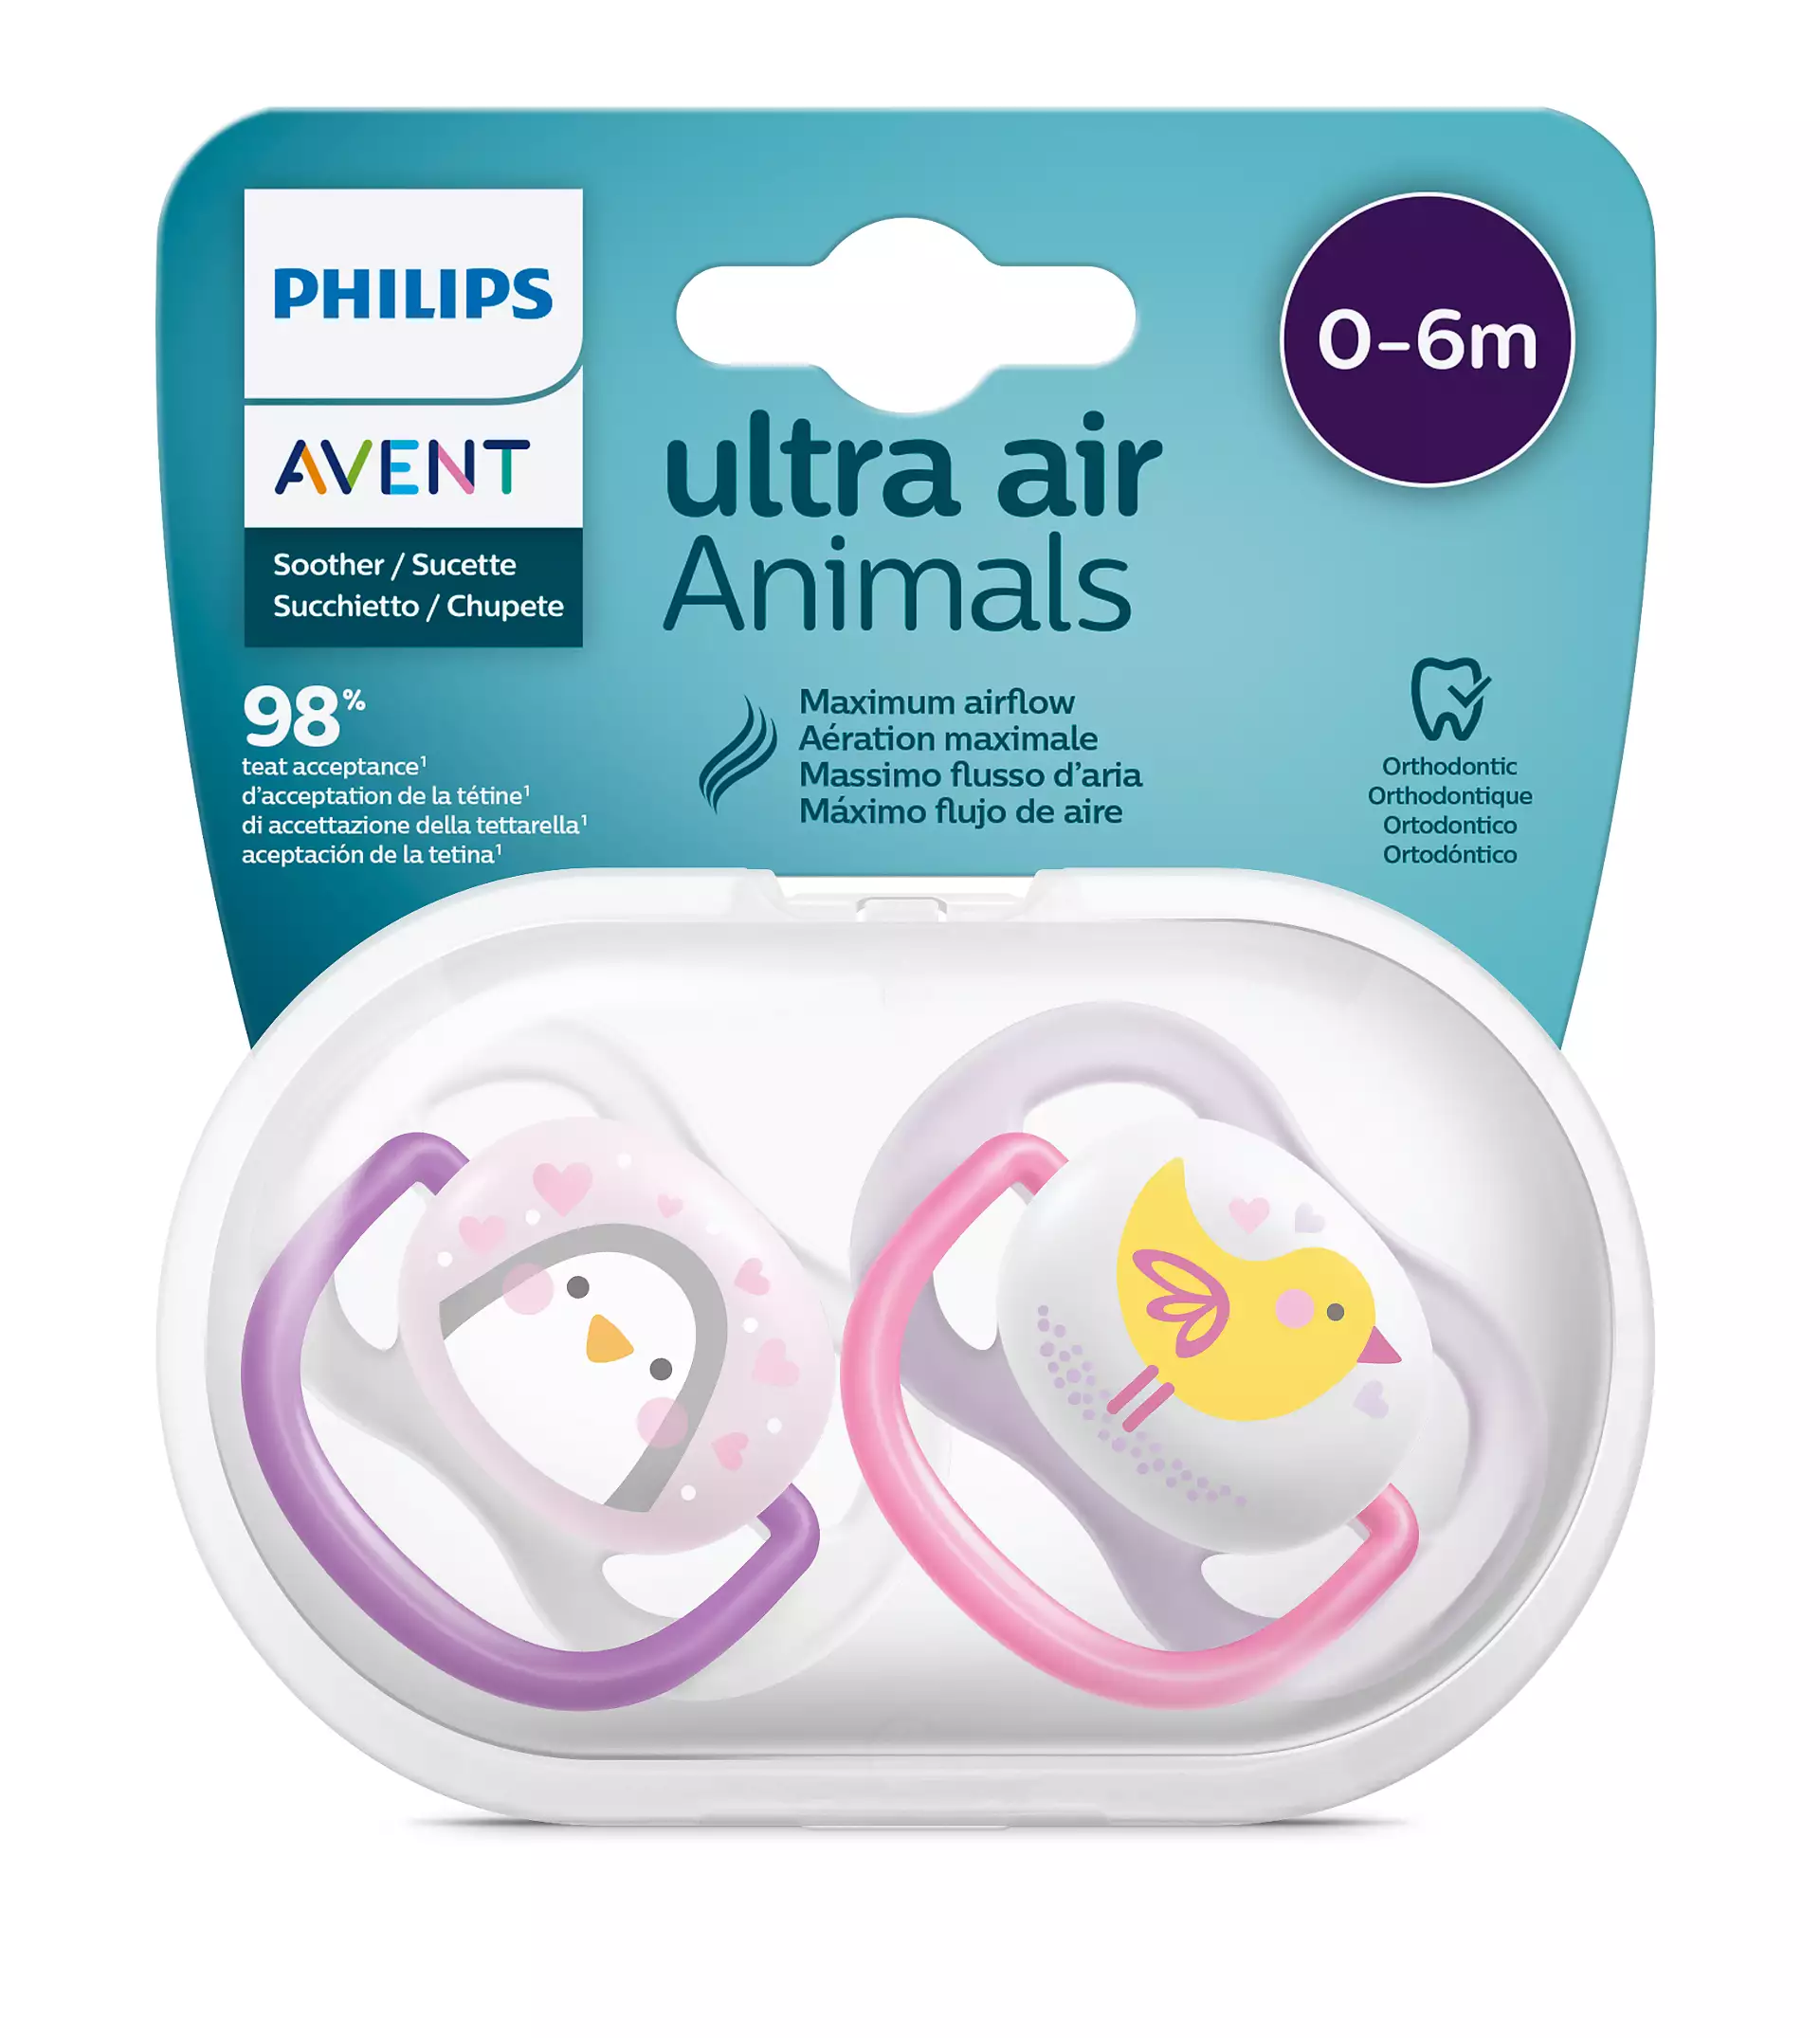 Philips Avent Ultra Air Animal Pacifier Orthodontic 0-6m (PINK PURPLE)